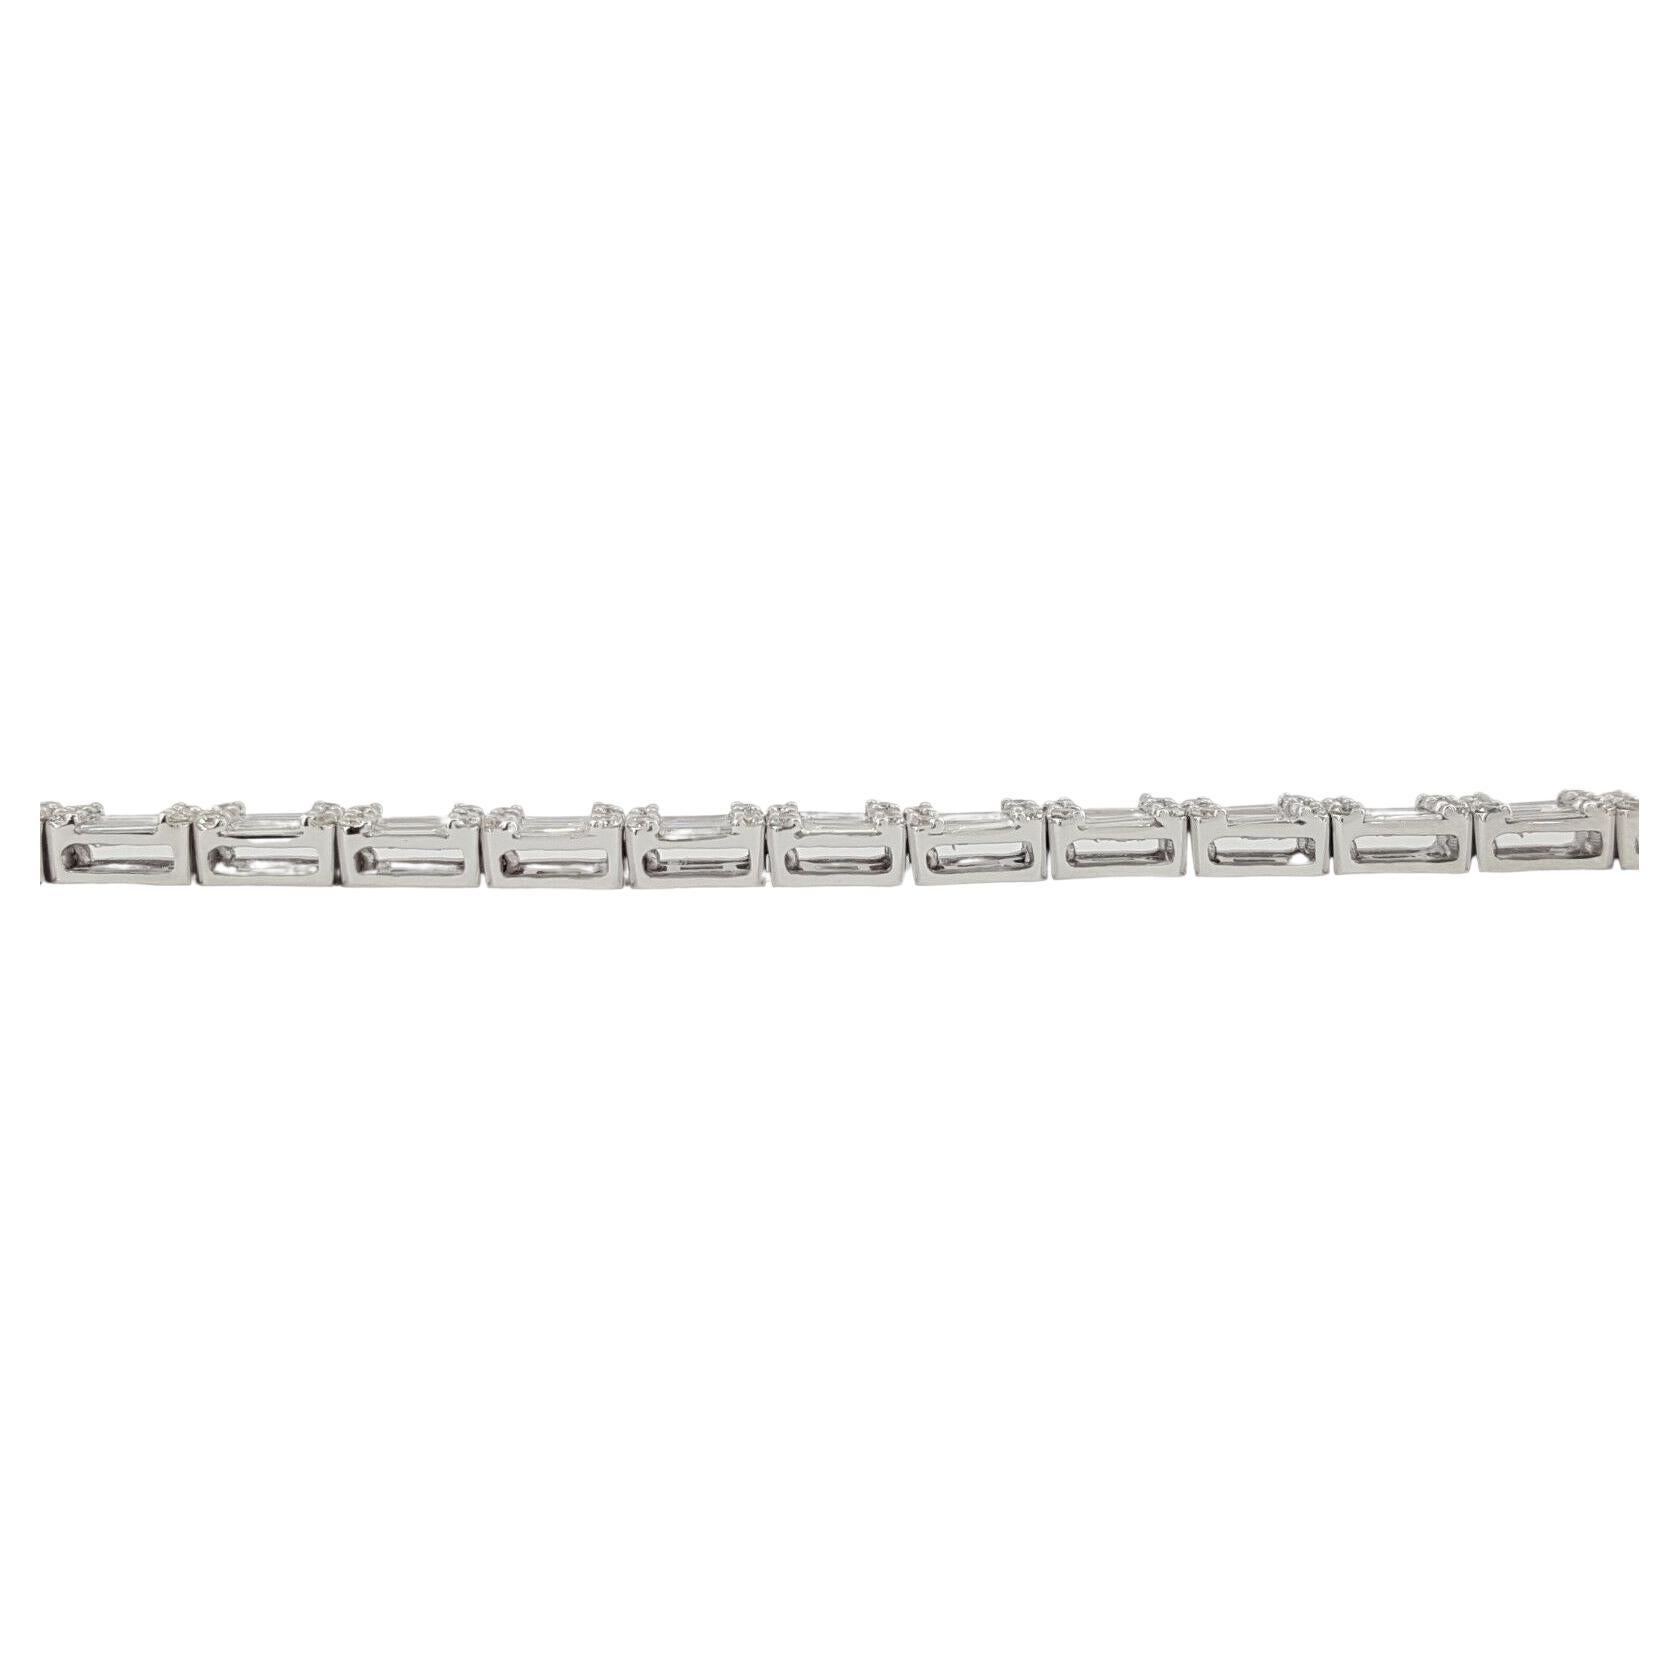 4.1 ct Total Weight Round Brilliant & Baguette Cut Diamond Three-Rows 18k White Gold Tennis Bracelet. 

The bracelet weighs 12.9 grams, 7 inches long, there are 180 Natural Round Brilliant Cut Diamonds & 90 Natural Baguette Diamonds weighing 4.1 ct,